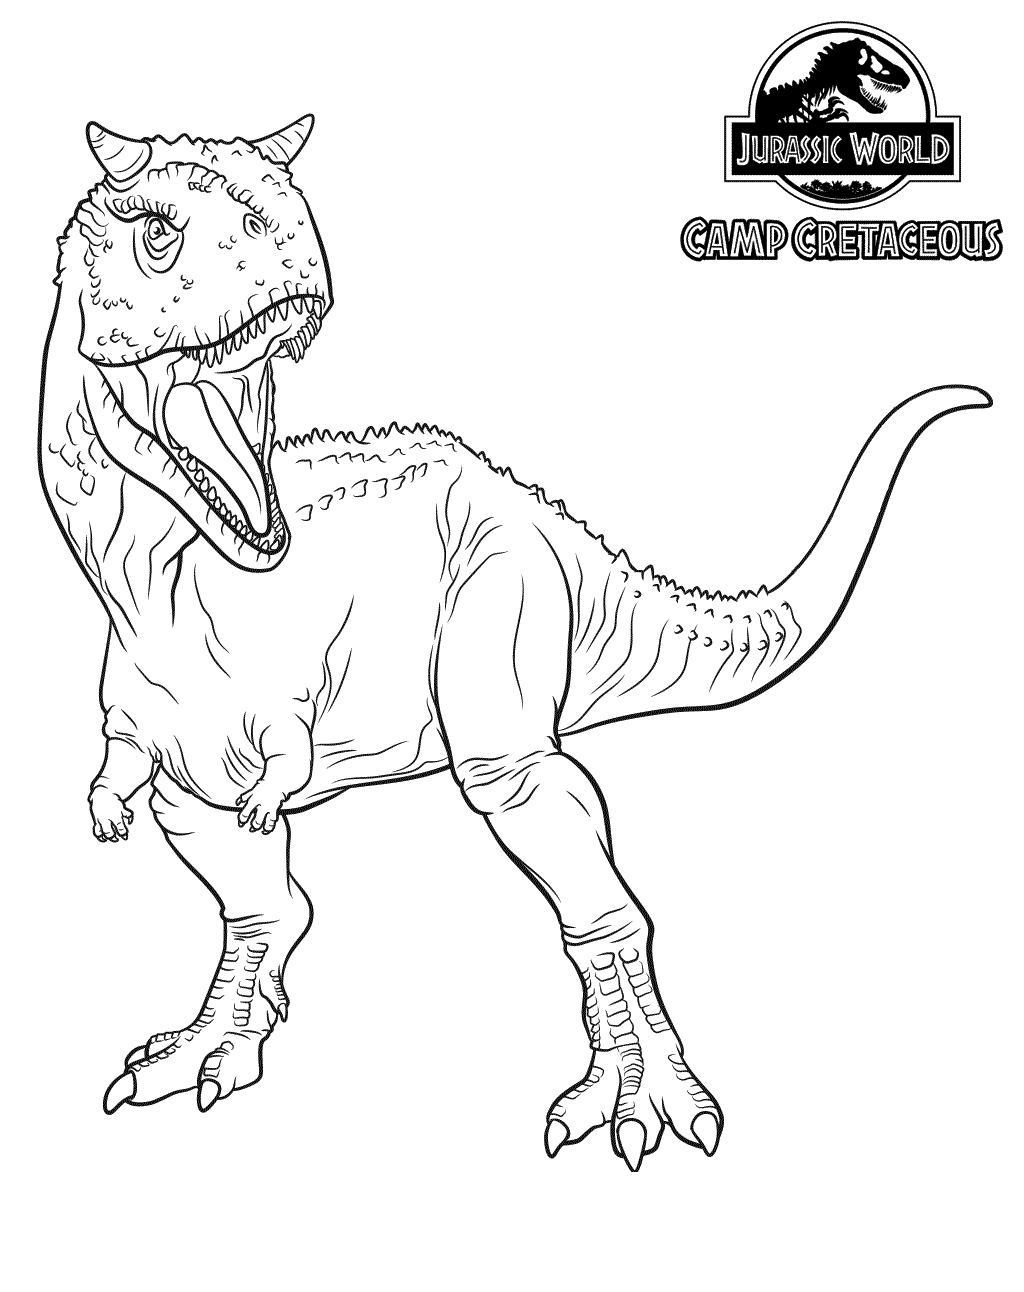 jurassic world carnotaurus coloring pages